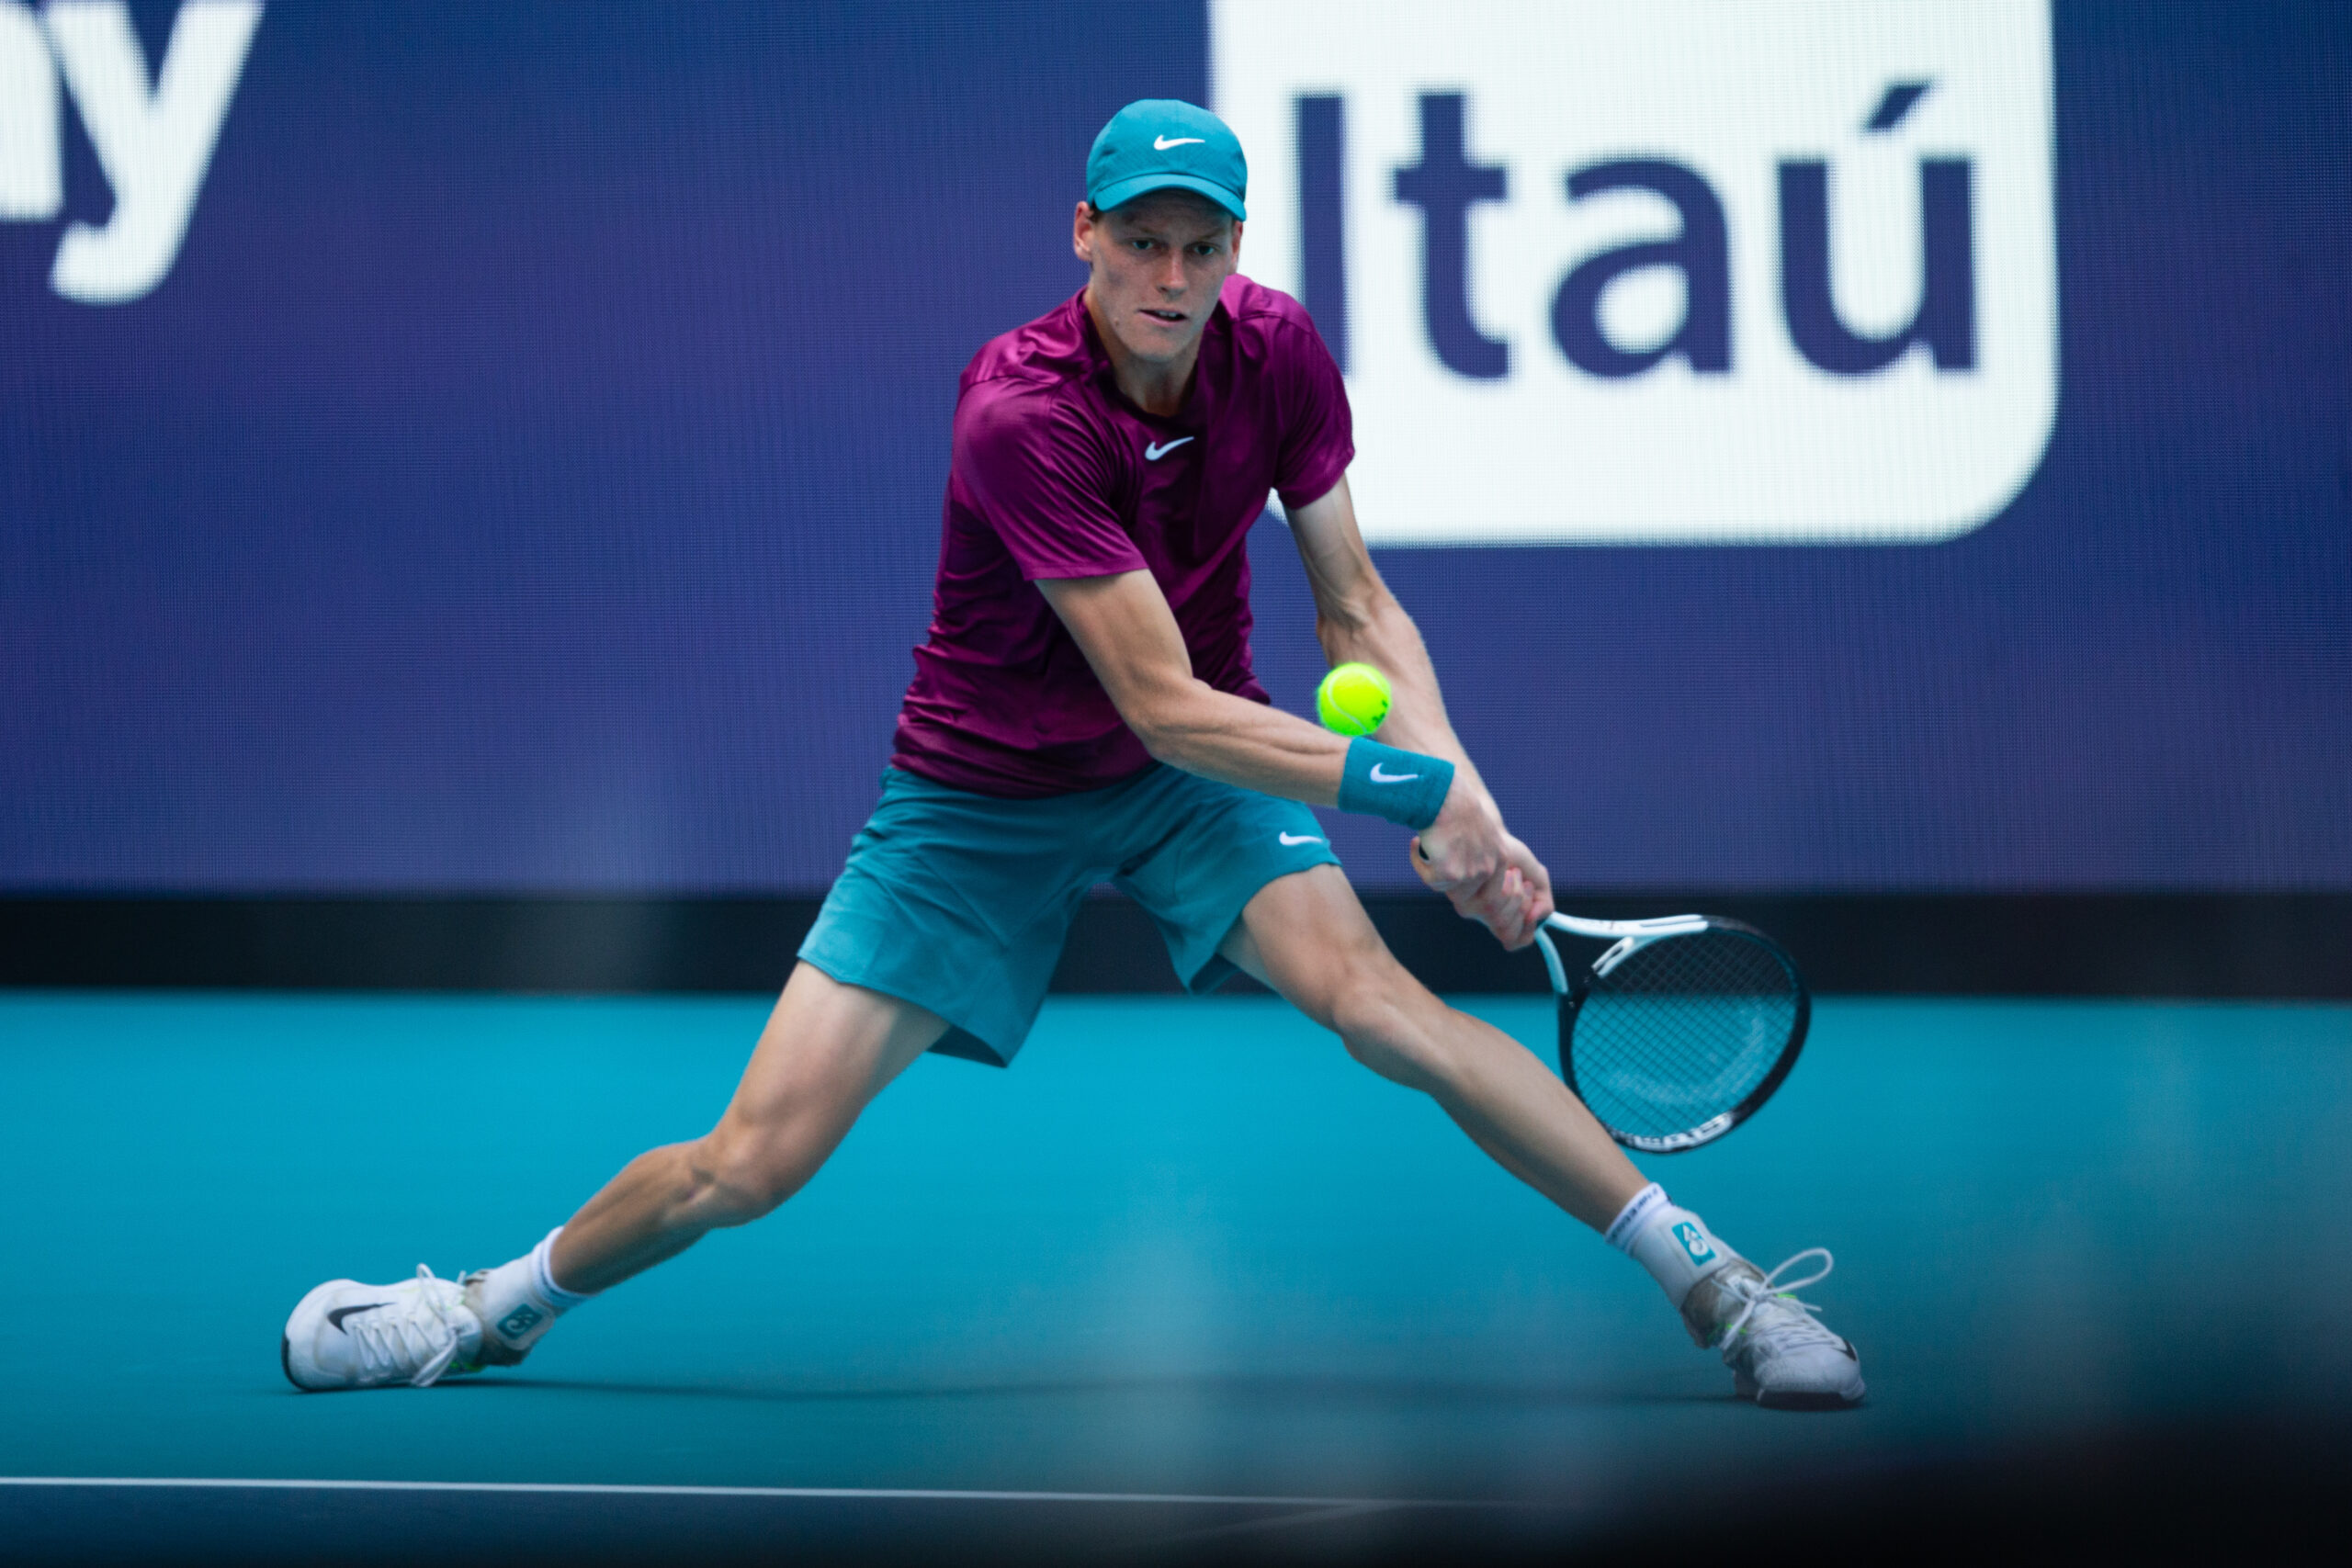 Jannik Sinner gets low for a forehand during the 2023 Miami Open Men's Singles Final at Hard Rock Stadium, April 2, 2023.